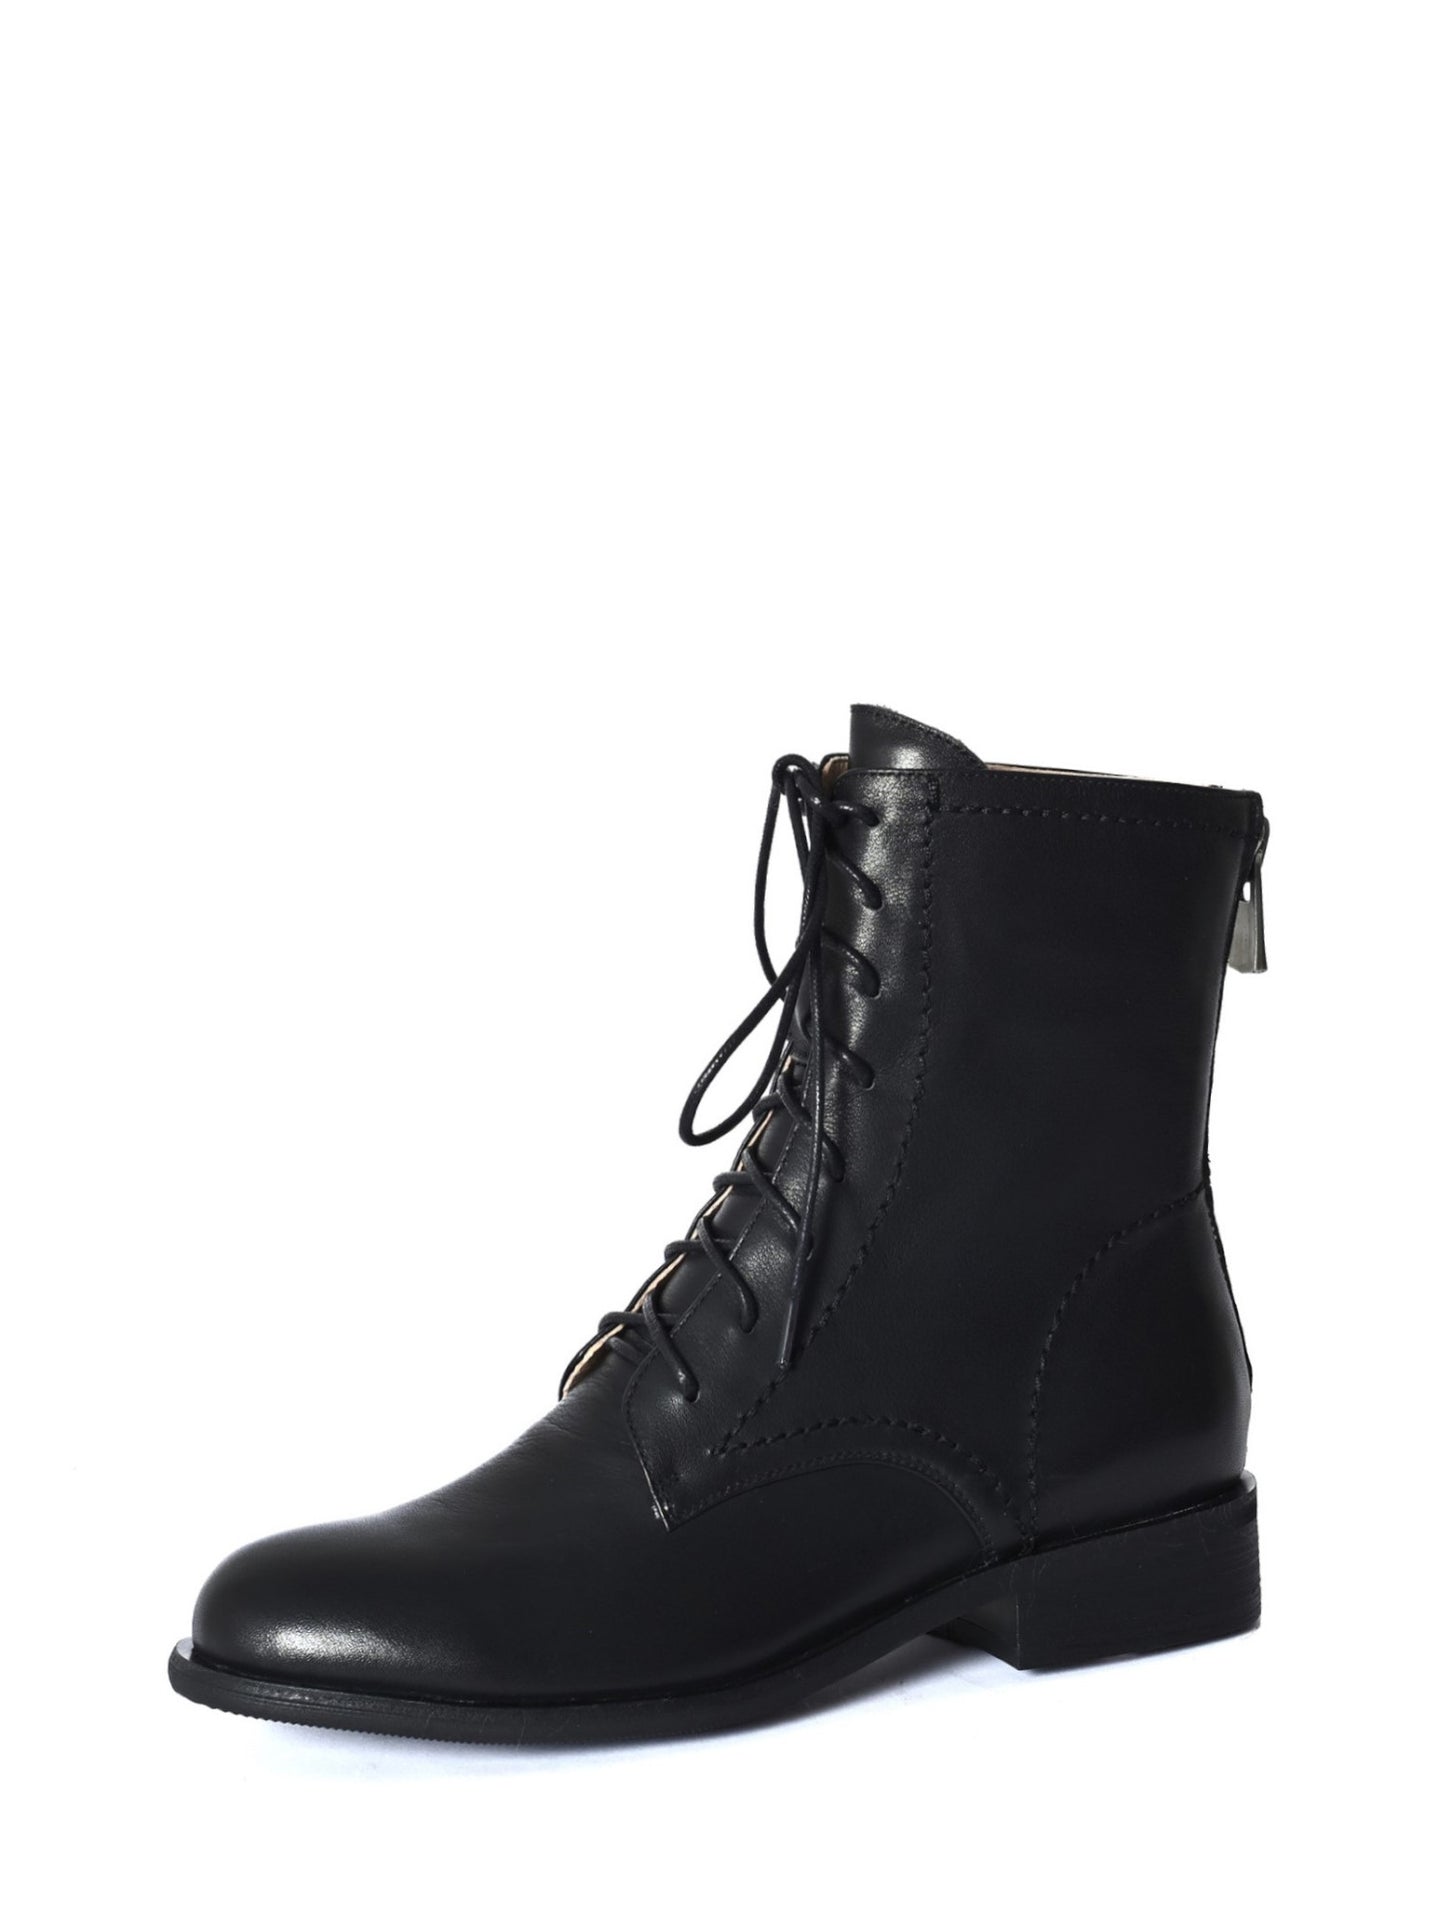 Iven-Black-Leather-Combat-Boots